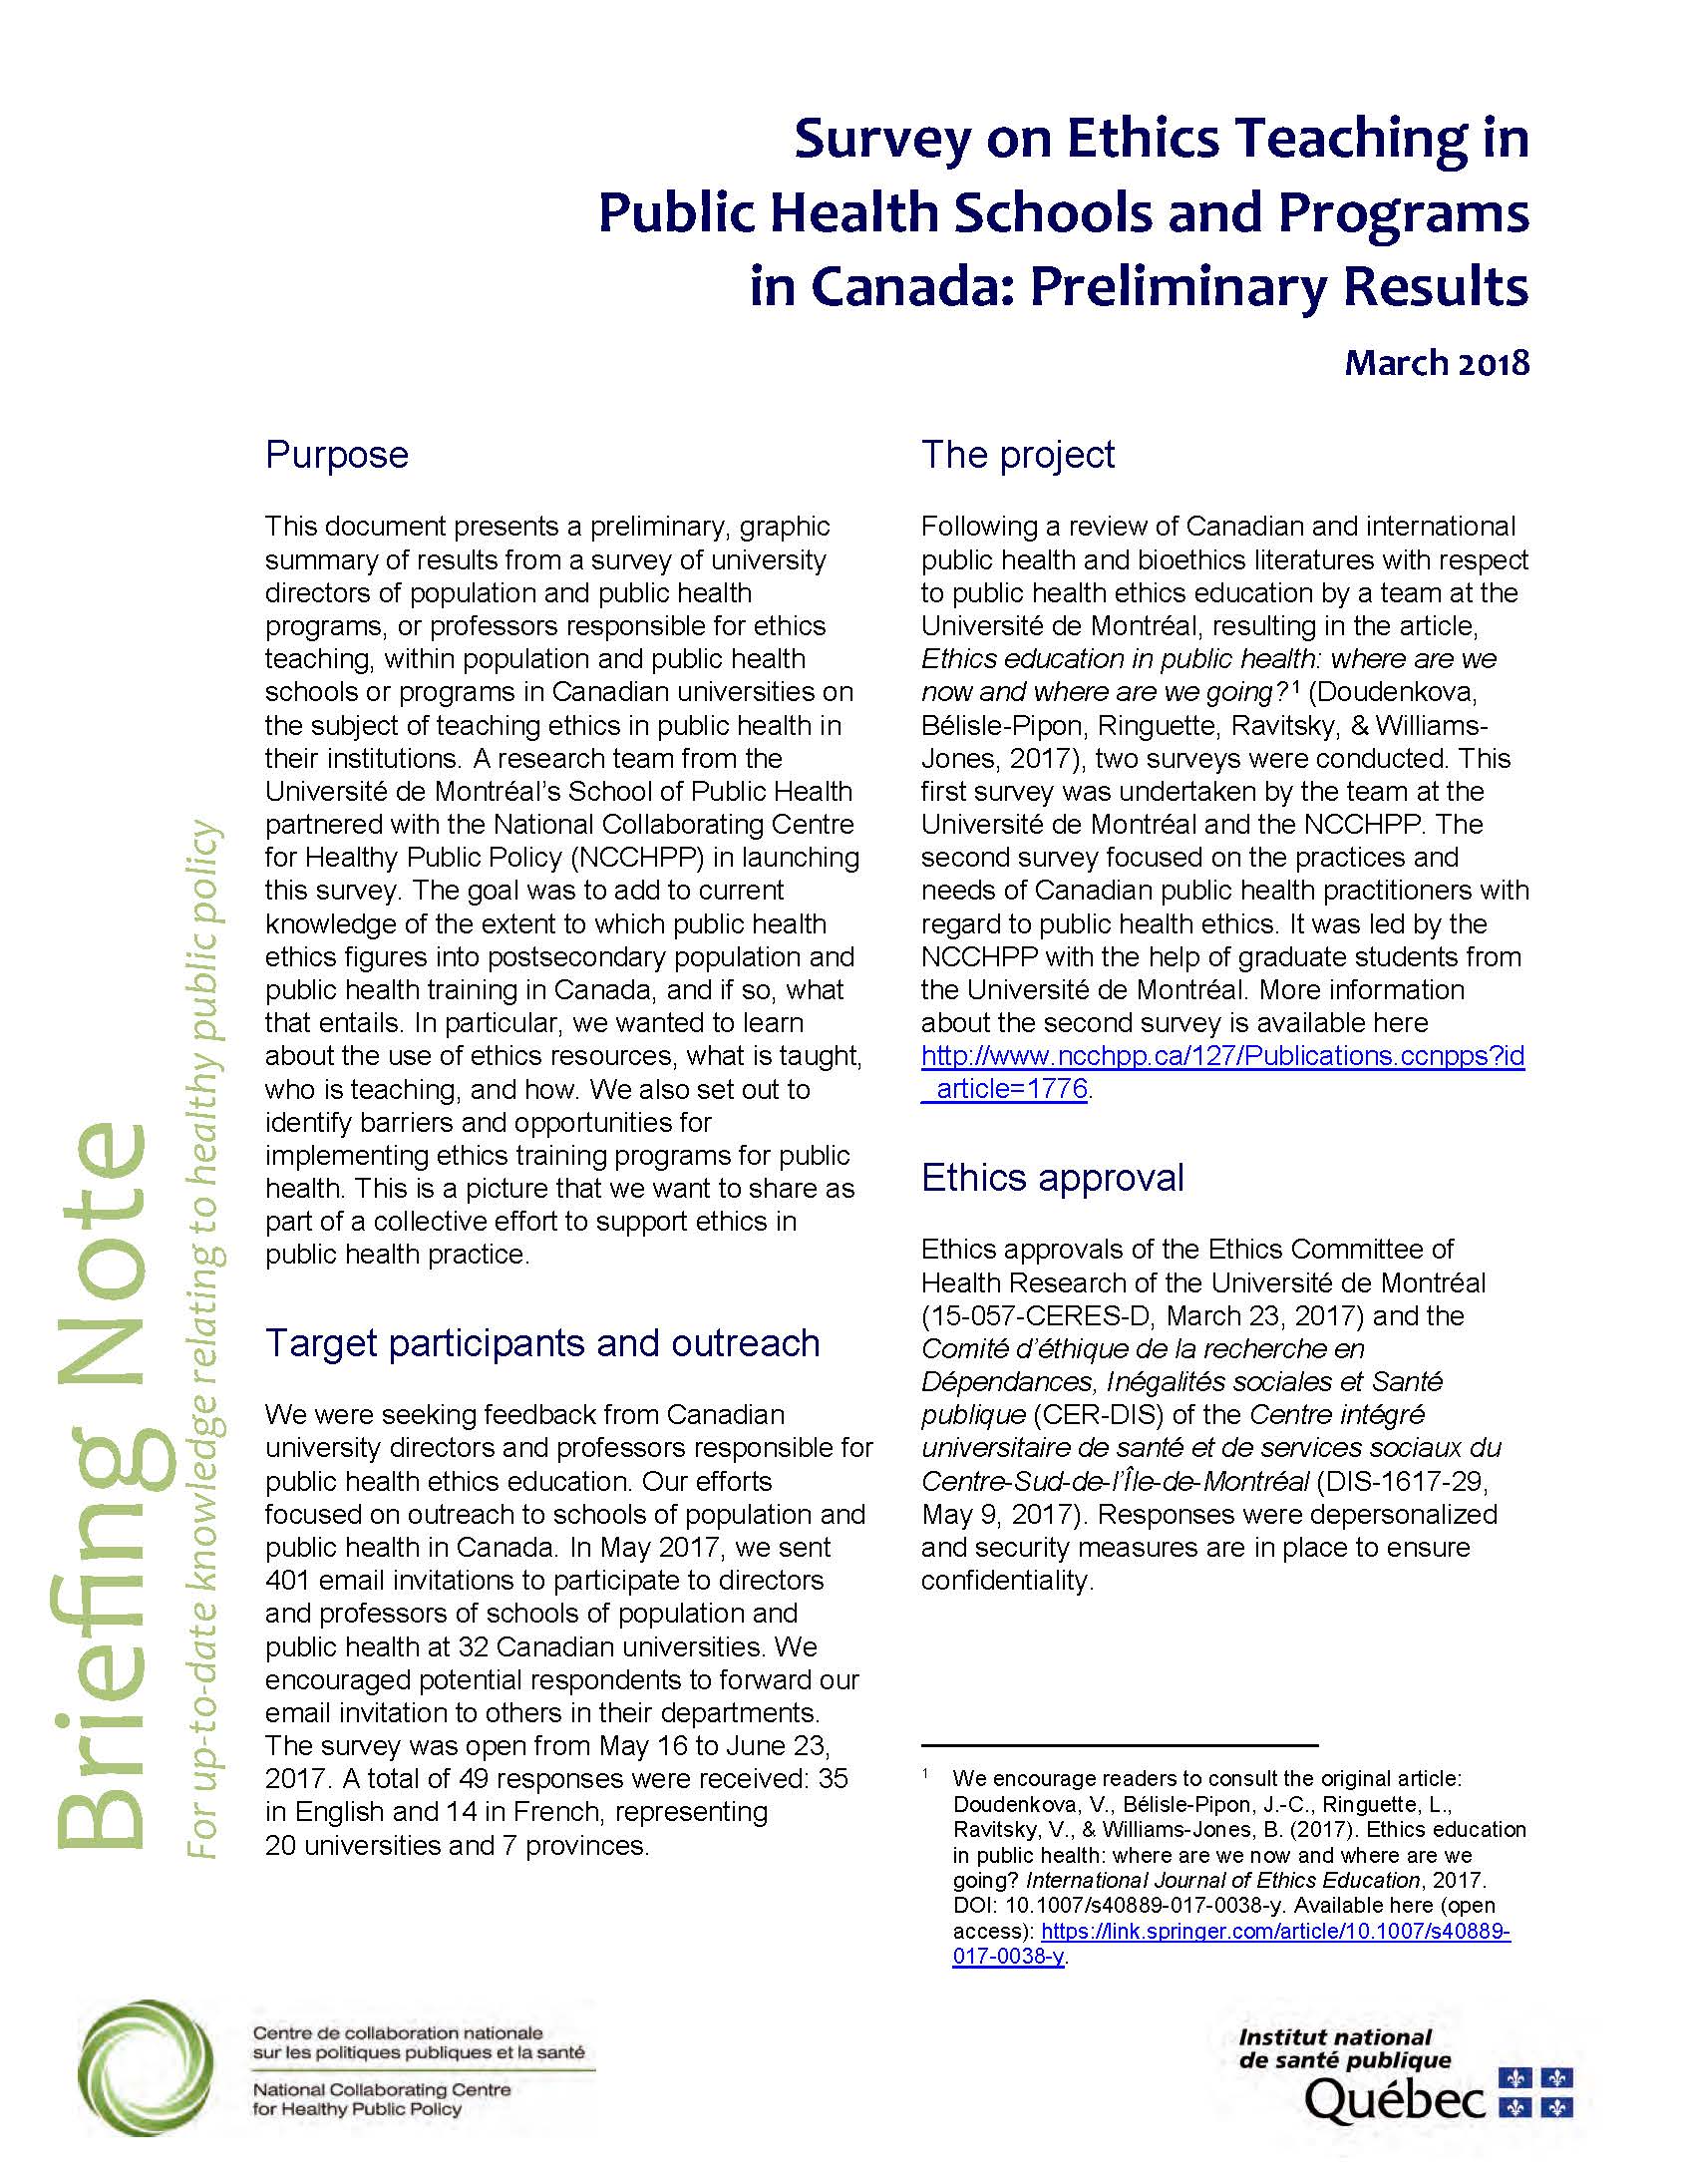 Survey on Ethics Teaching in Public Health Schools and Programs in Canada: Preliminary Results